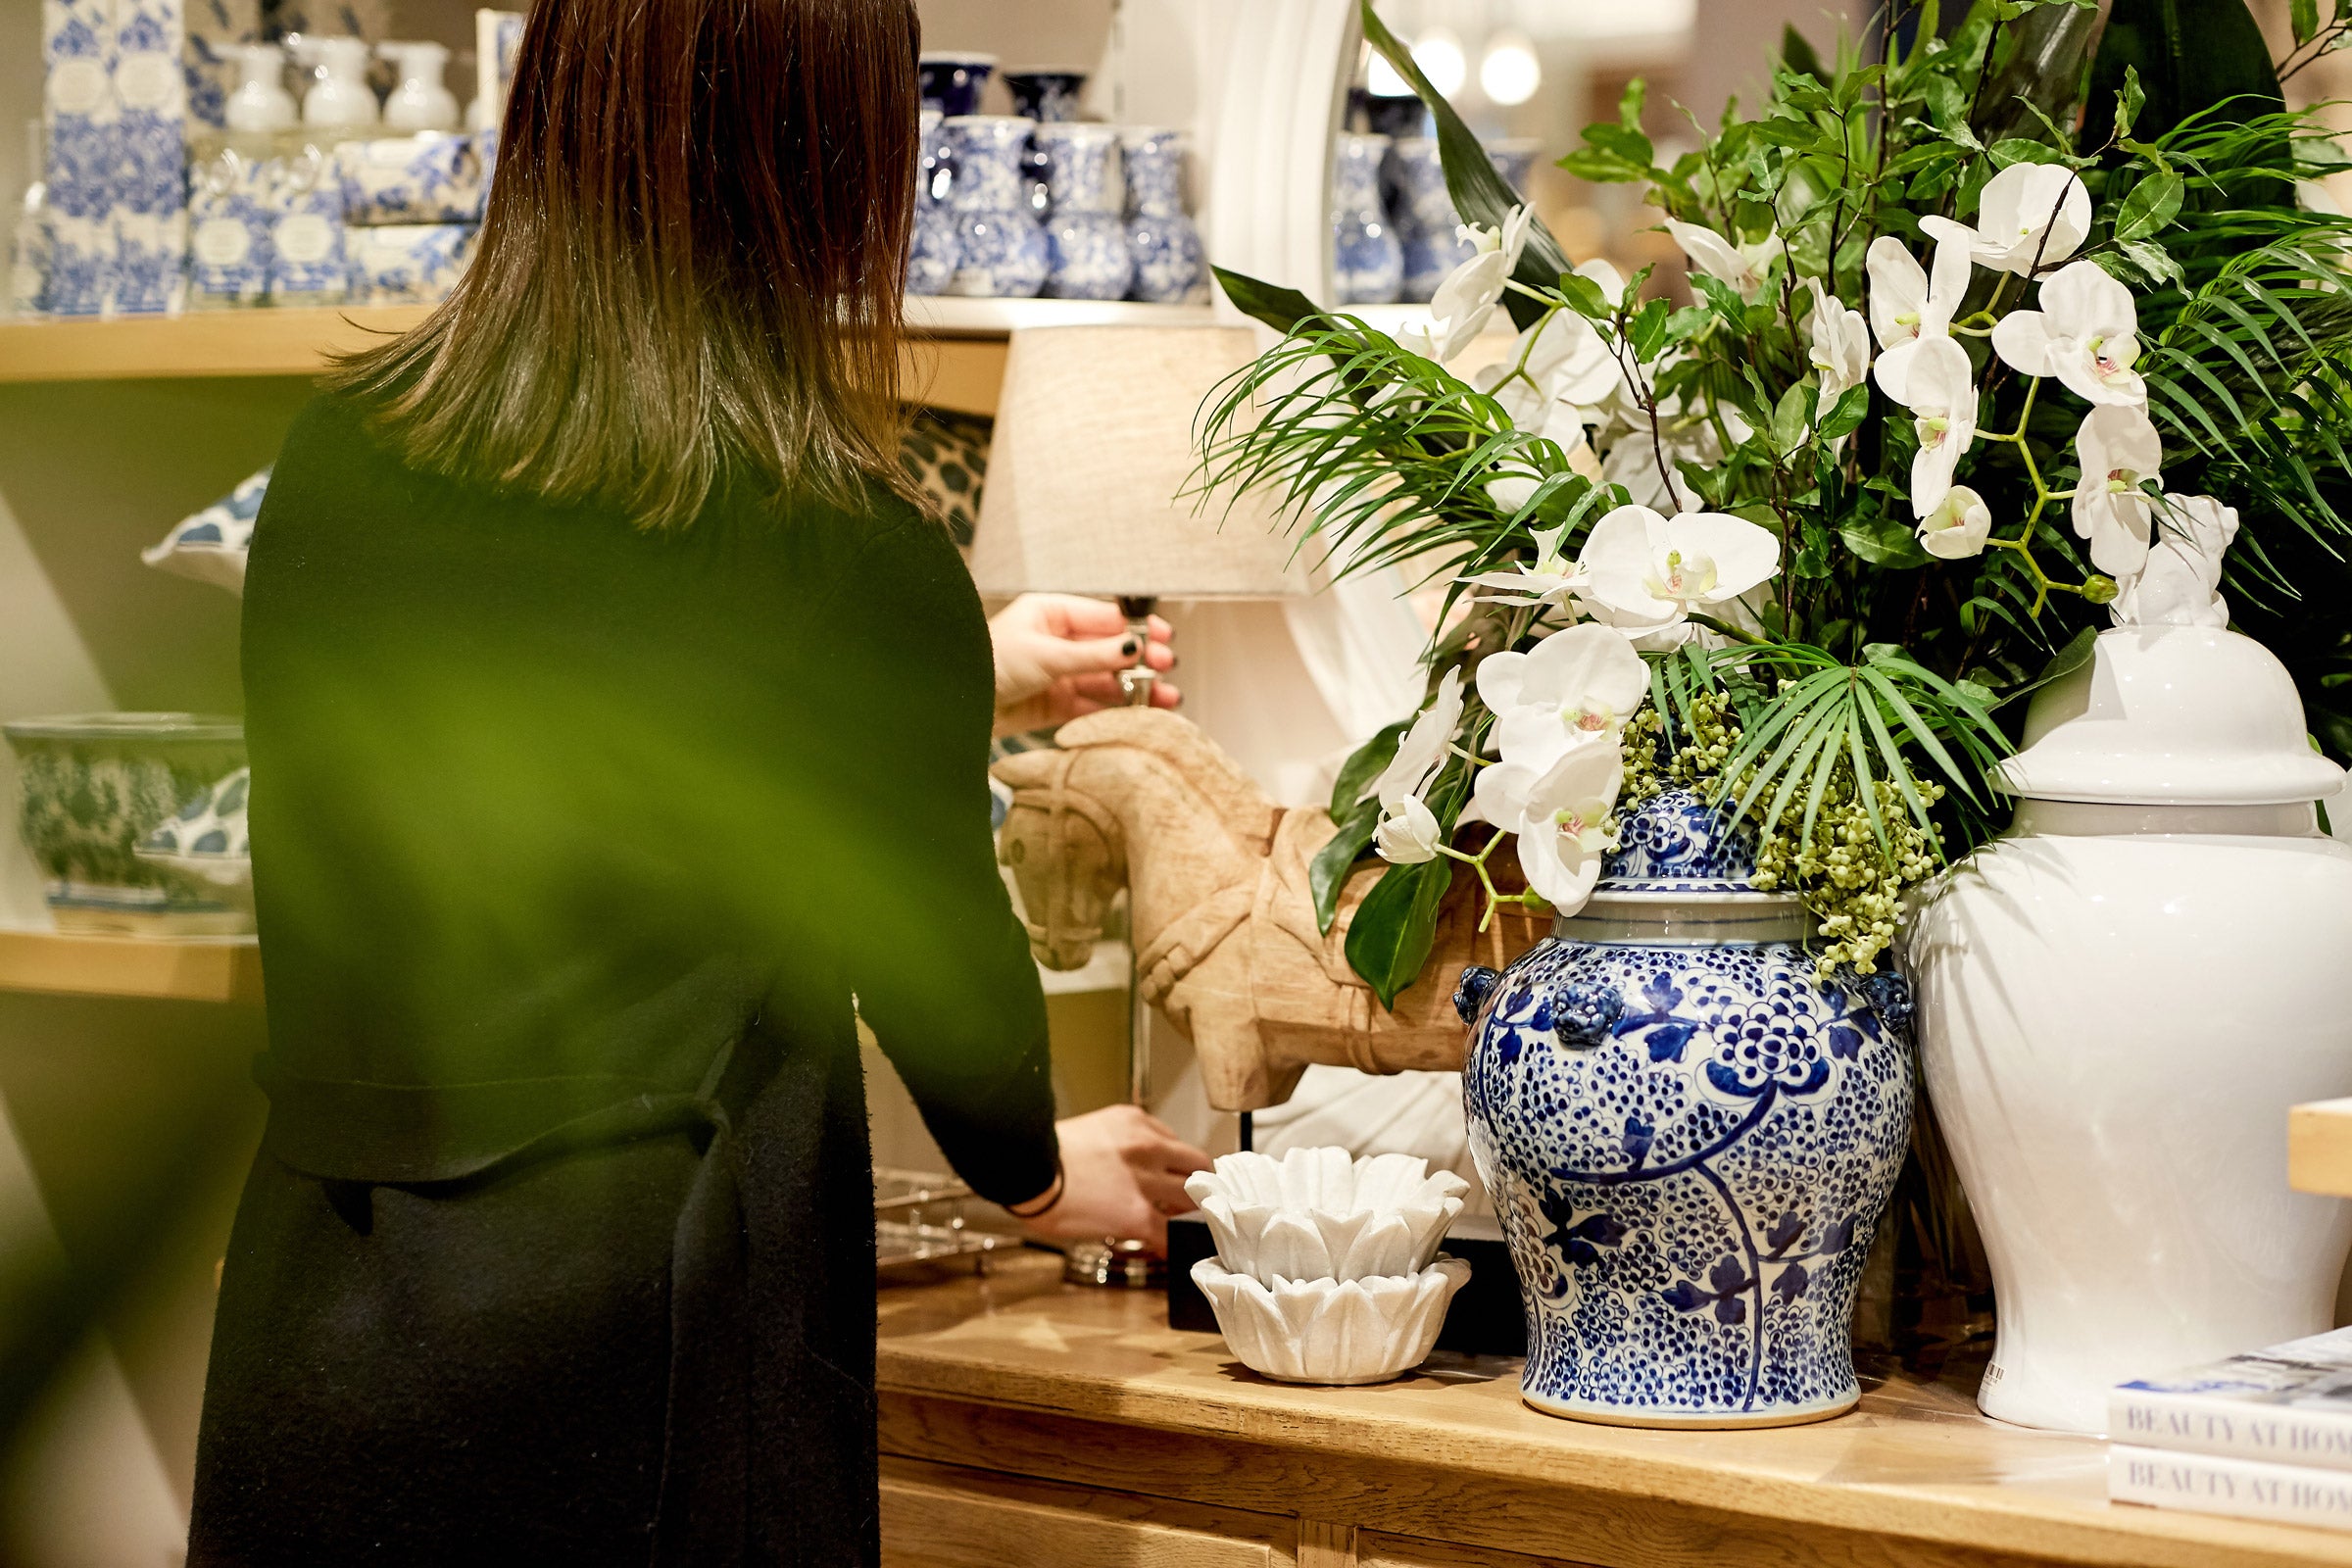 A sales team member adjusting a lamp in one of our beautiful store displays.